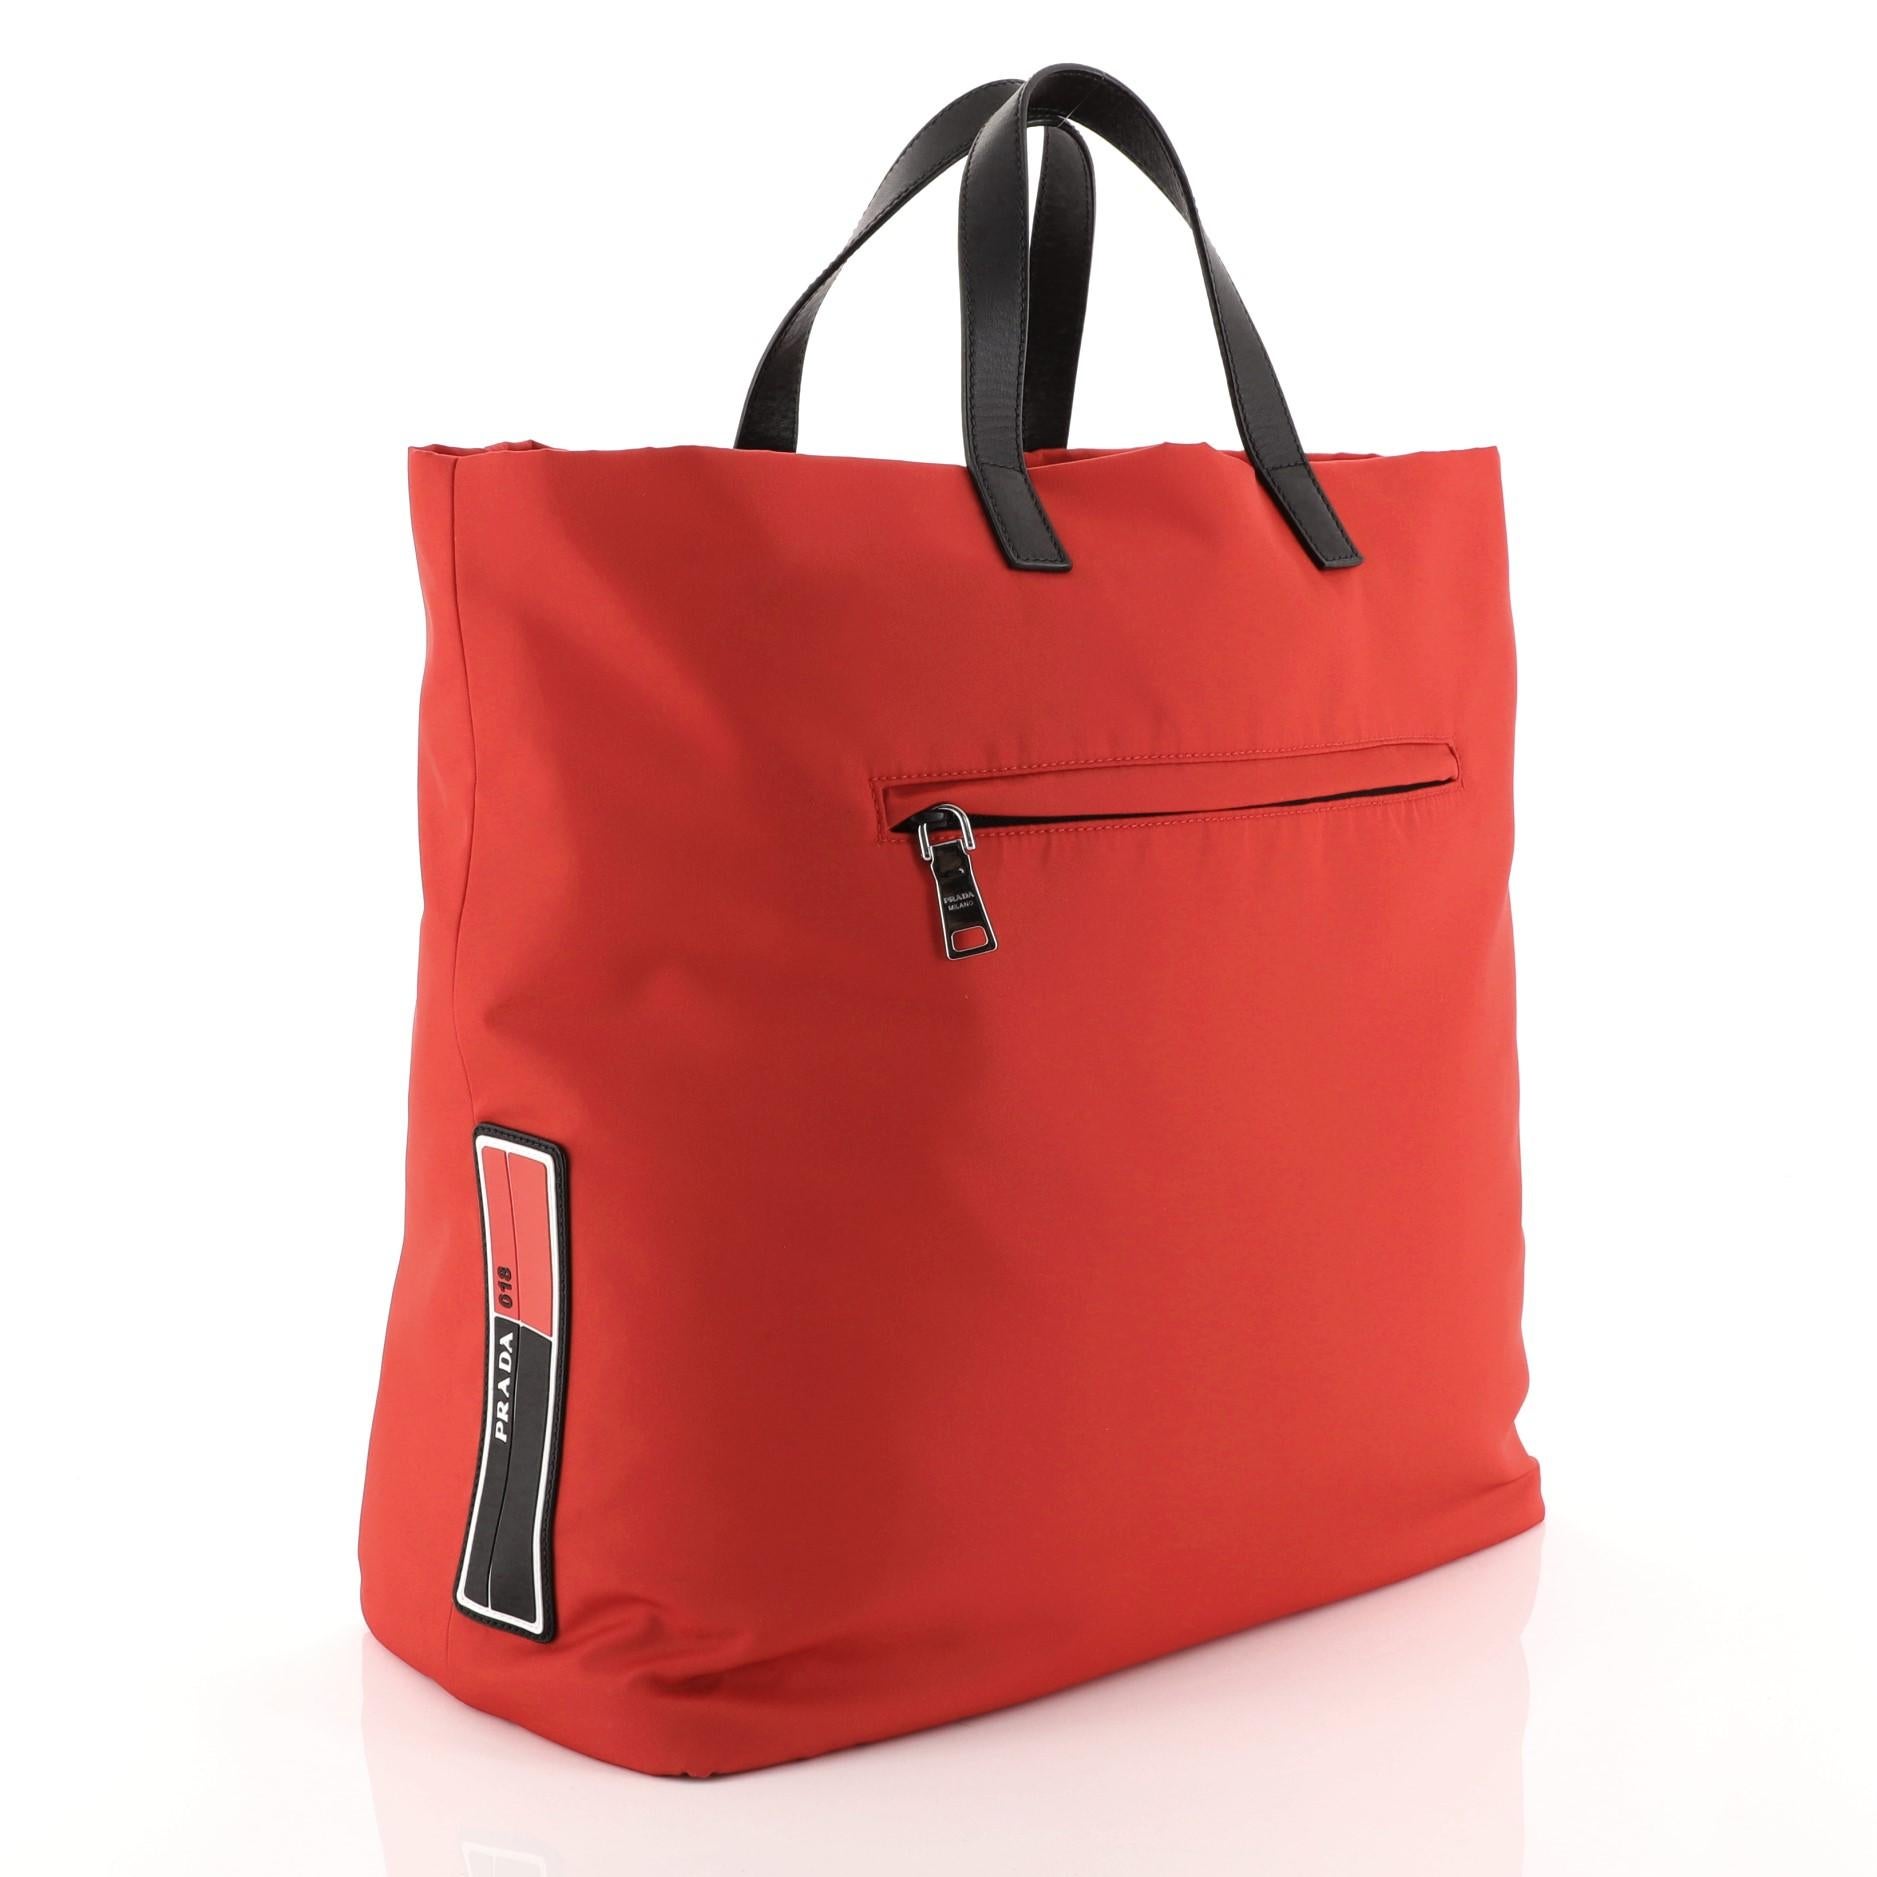 This Prada Technical Tote Tessuto Large, crafted from red tessuto, features dual top handles, exterior front zip pocket and silver-tone hardware. It opens to a red and black nylon interior with side zip pocket. 

Estimated Retail Price: